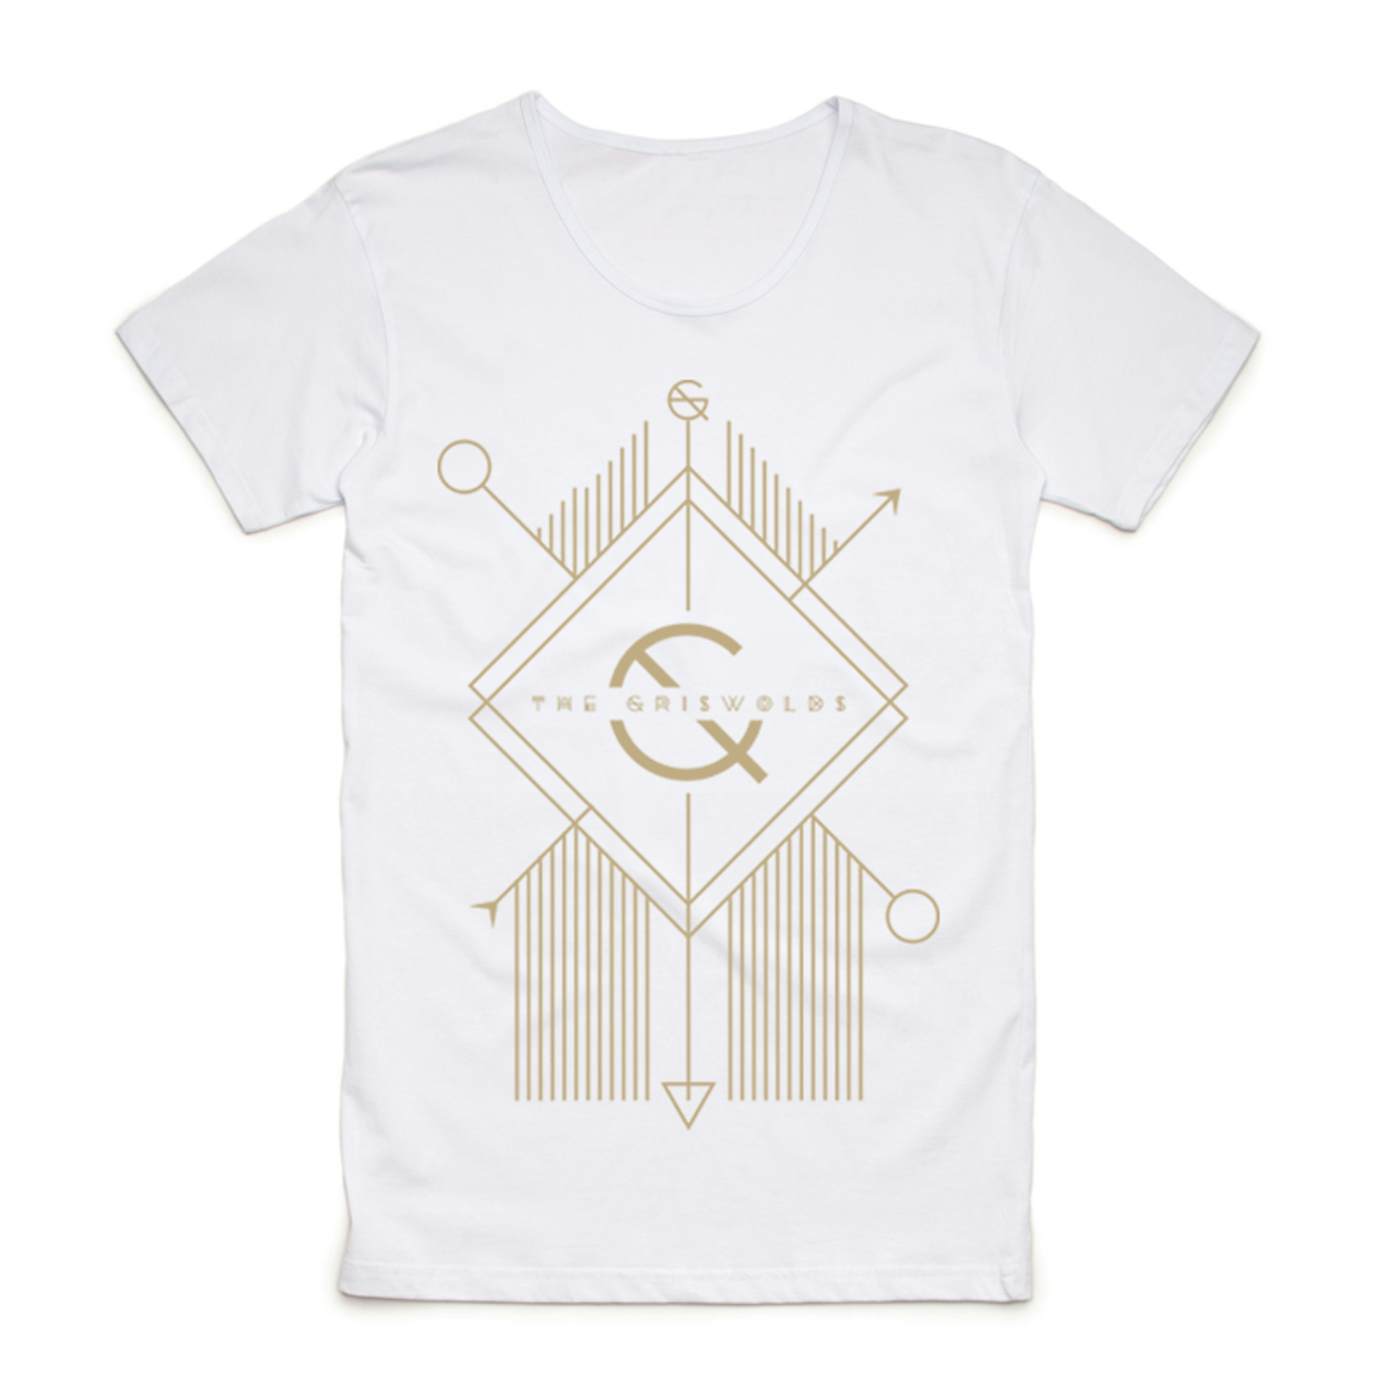 The Griswolds - White Logo Tee